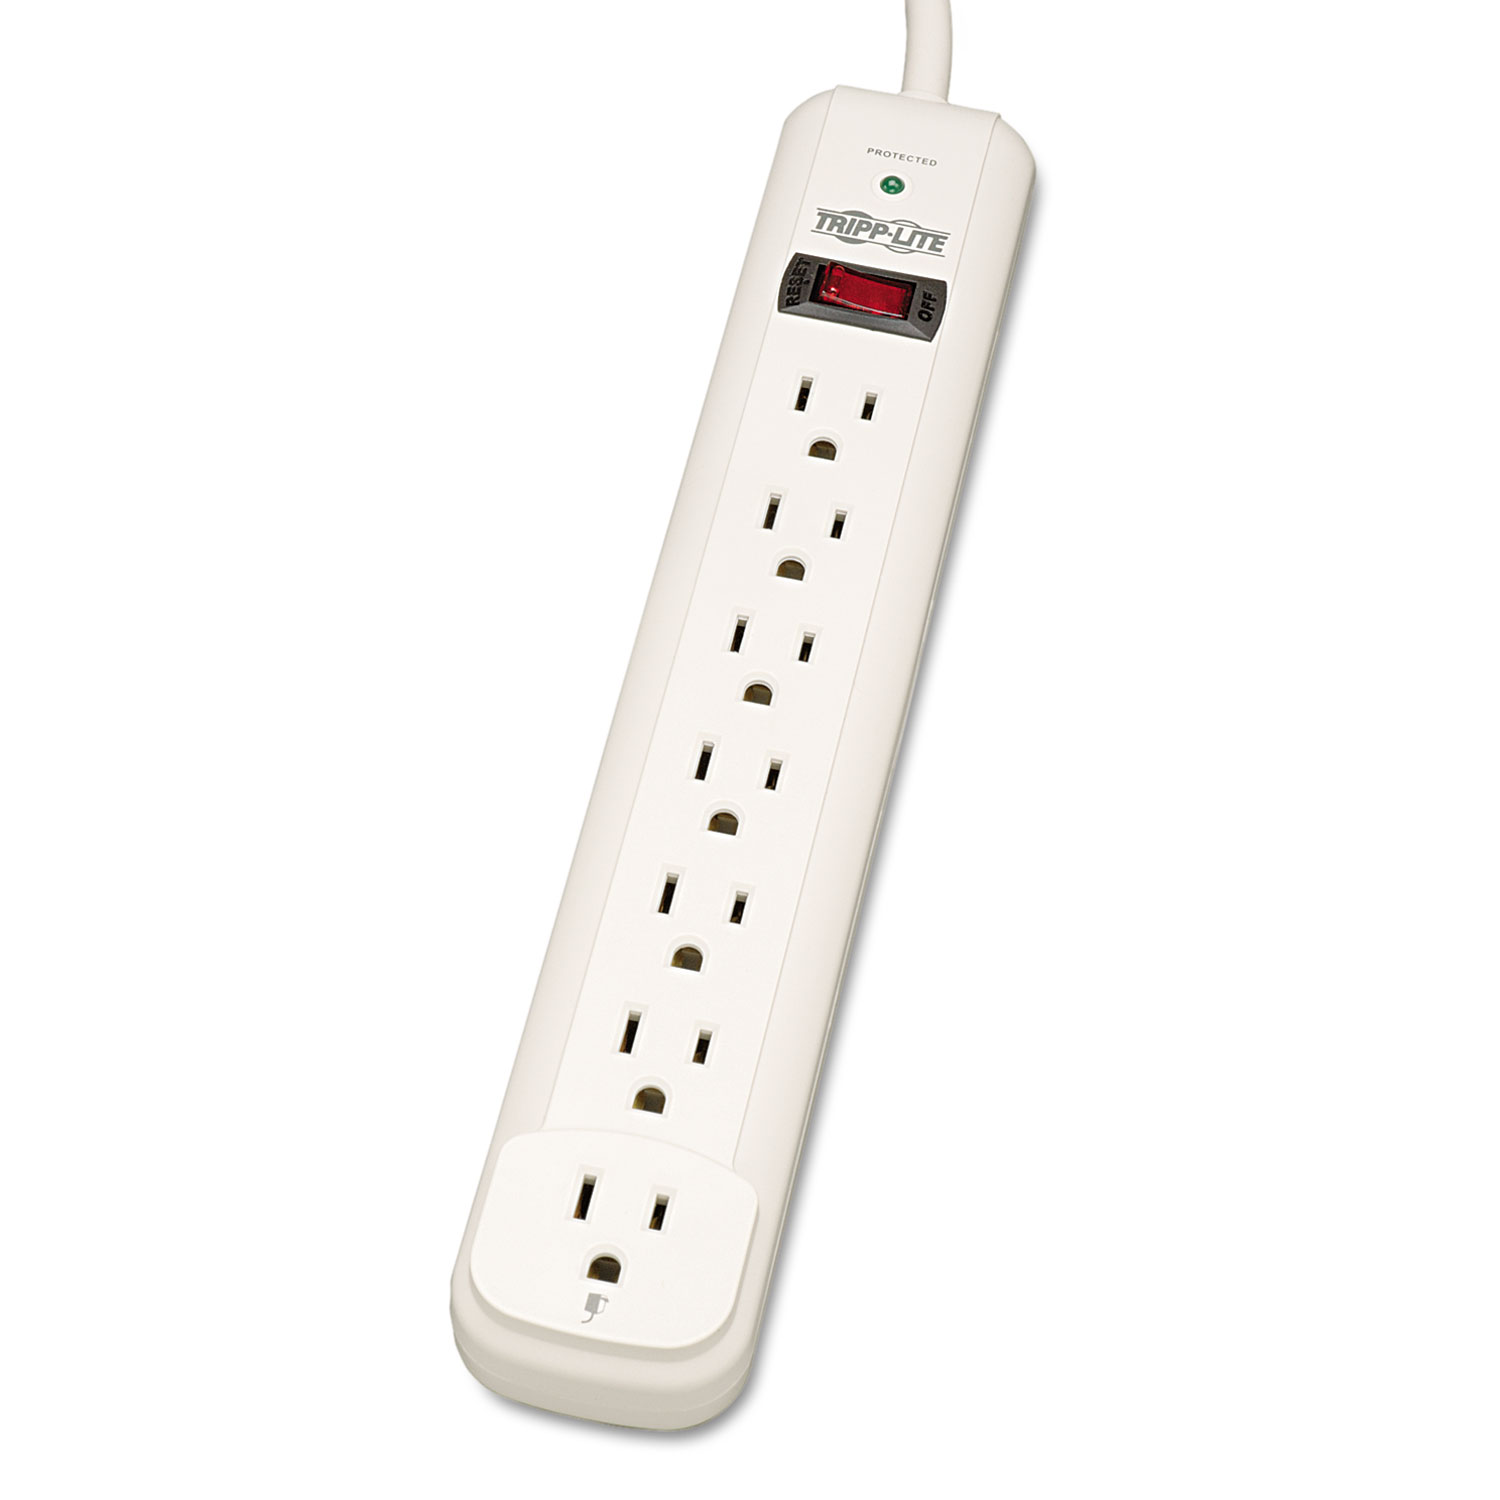 Protect It! Surge Protector, 7 Outlets, 25 ft. Cord, 1080 Joules, Light Gray